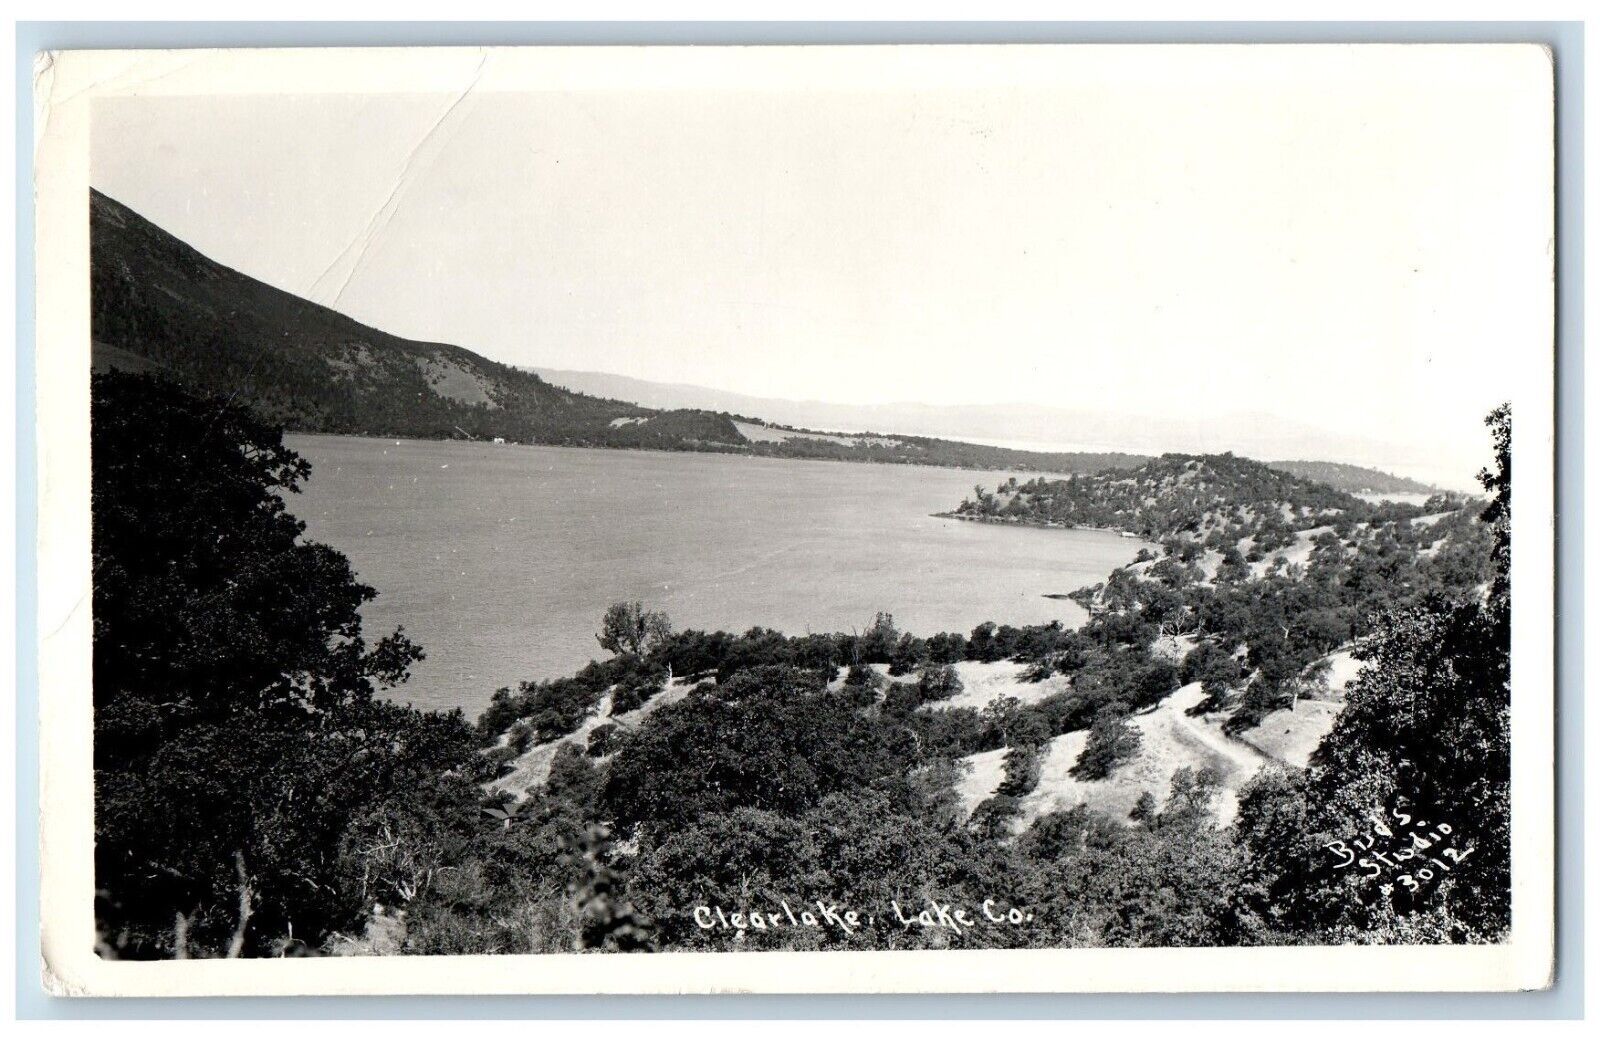 Clearlake California CA Postcard RPPC Photo Lake Co. View c1940\'s Posted Vintage